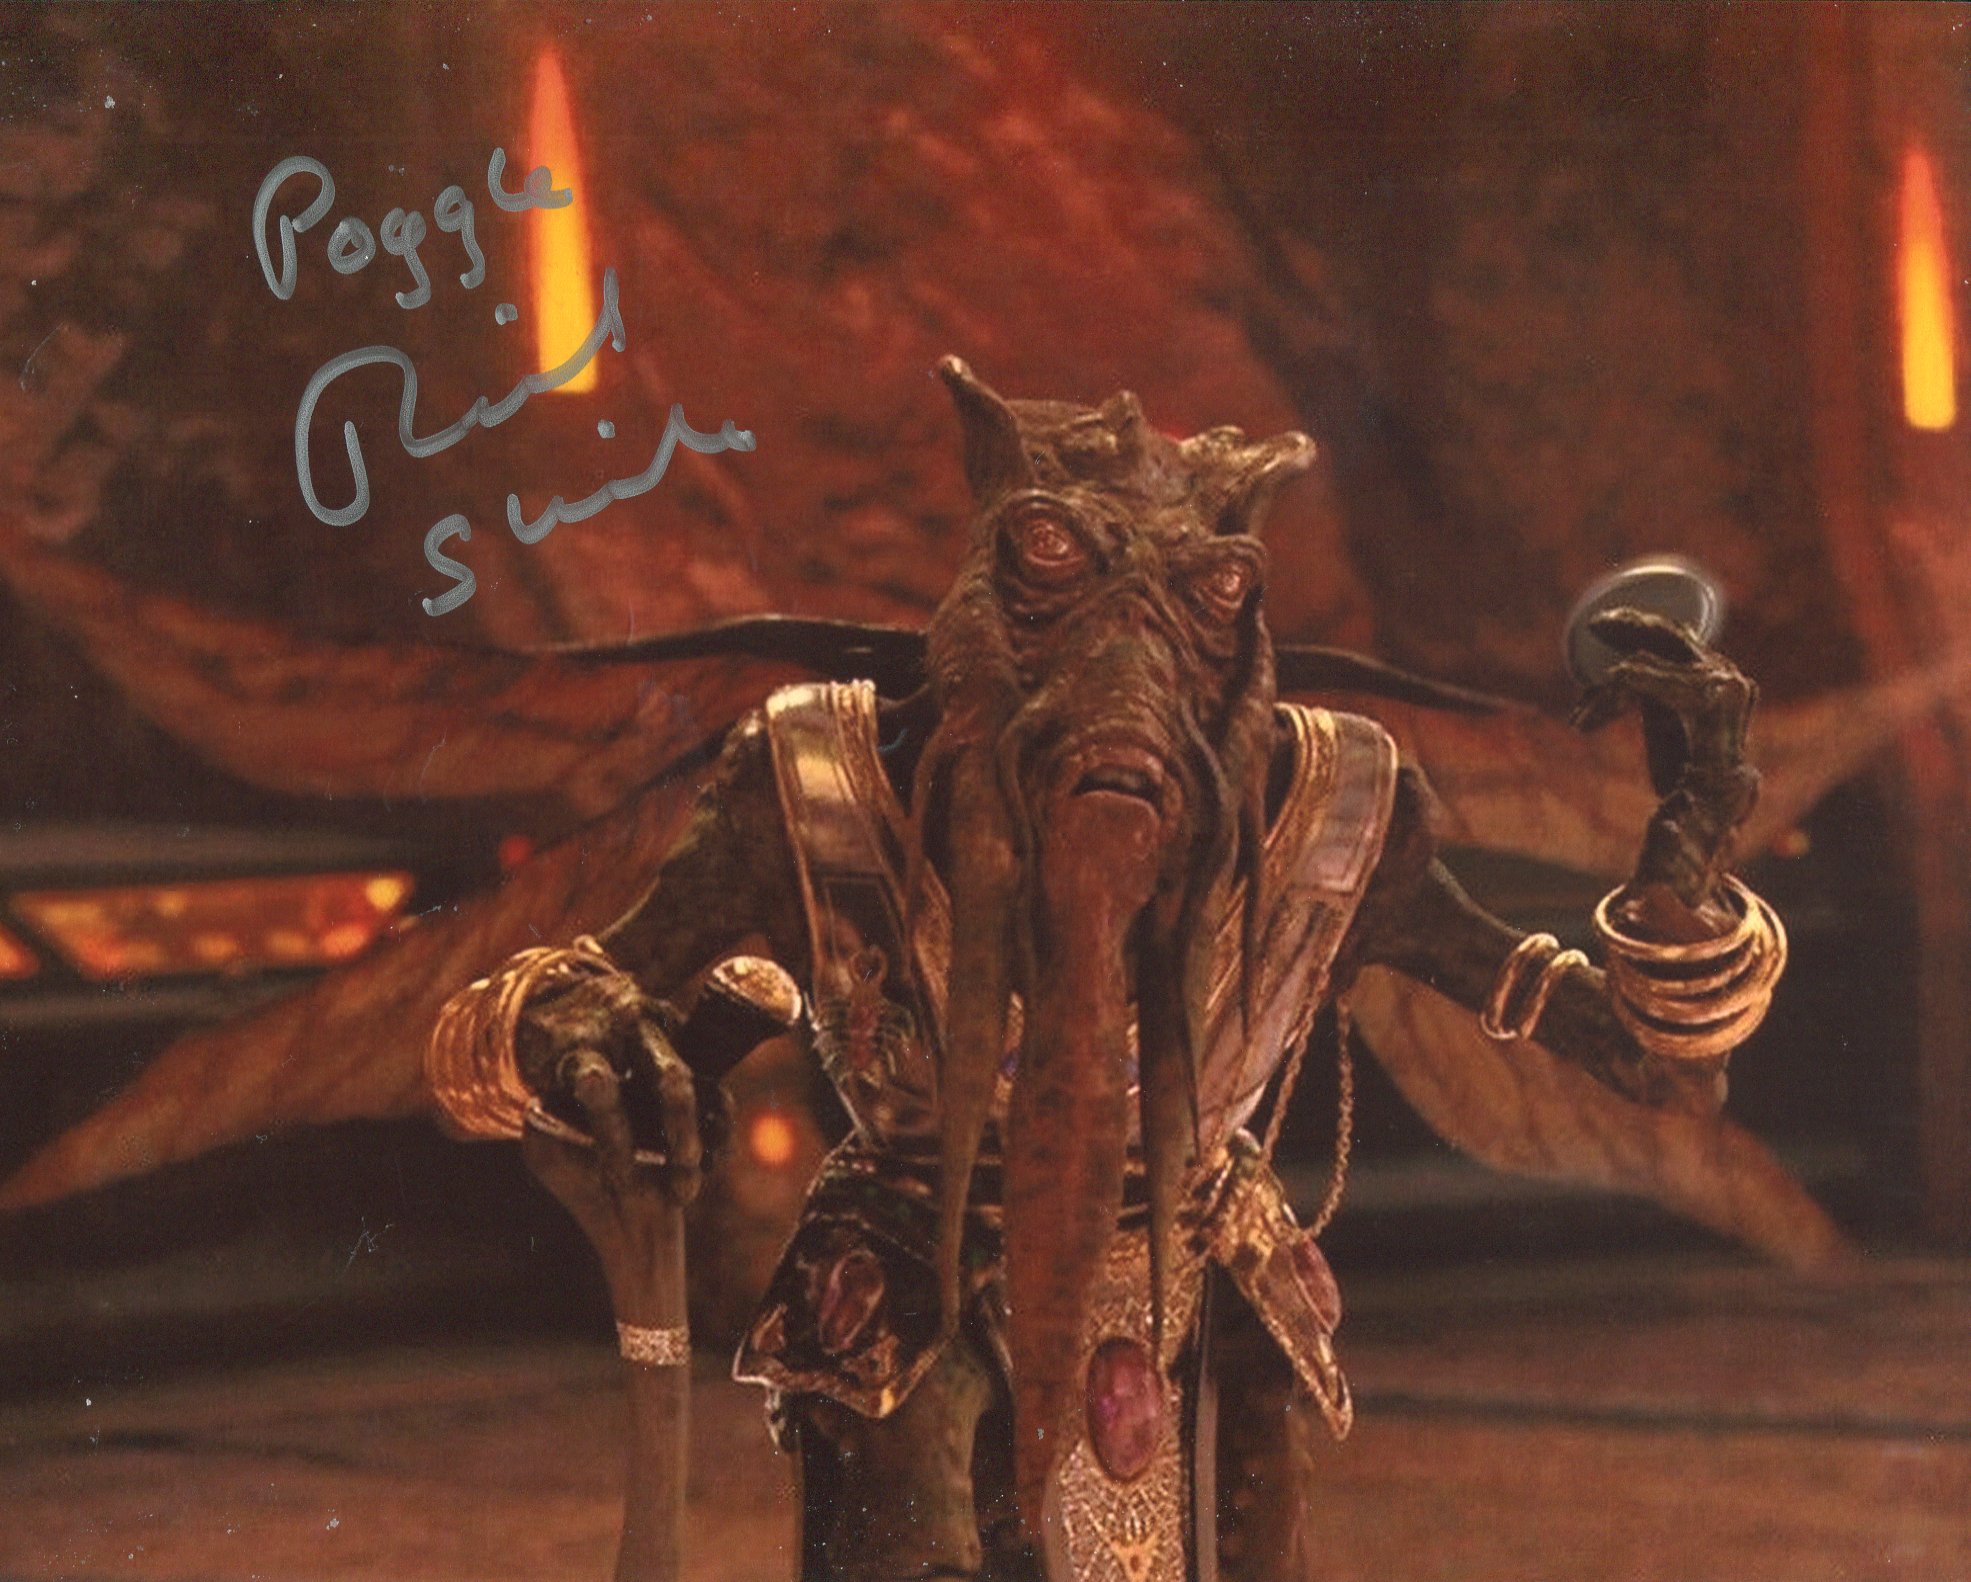 Star Wars 8x10 photo signed by actor Richard Stride as Poggle. Good condition. All autographs come